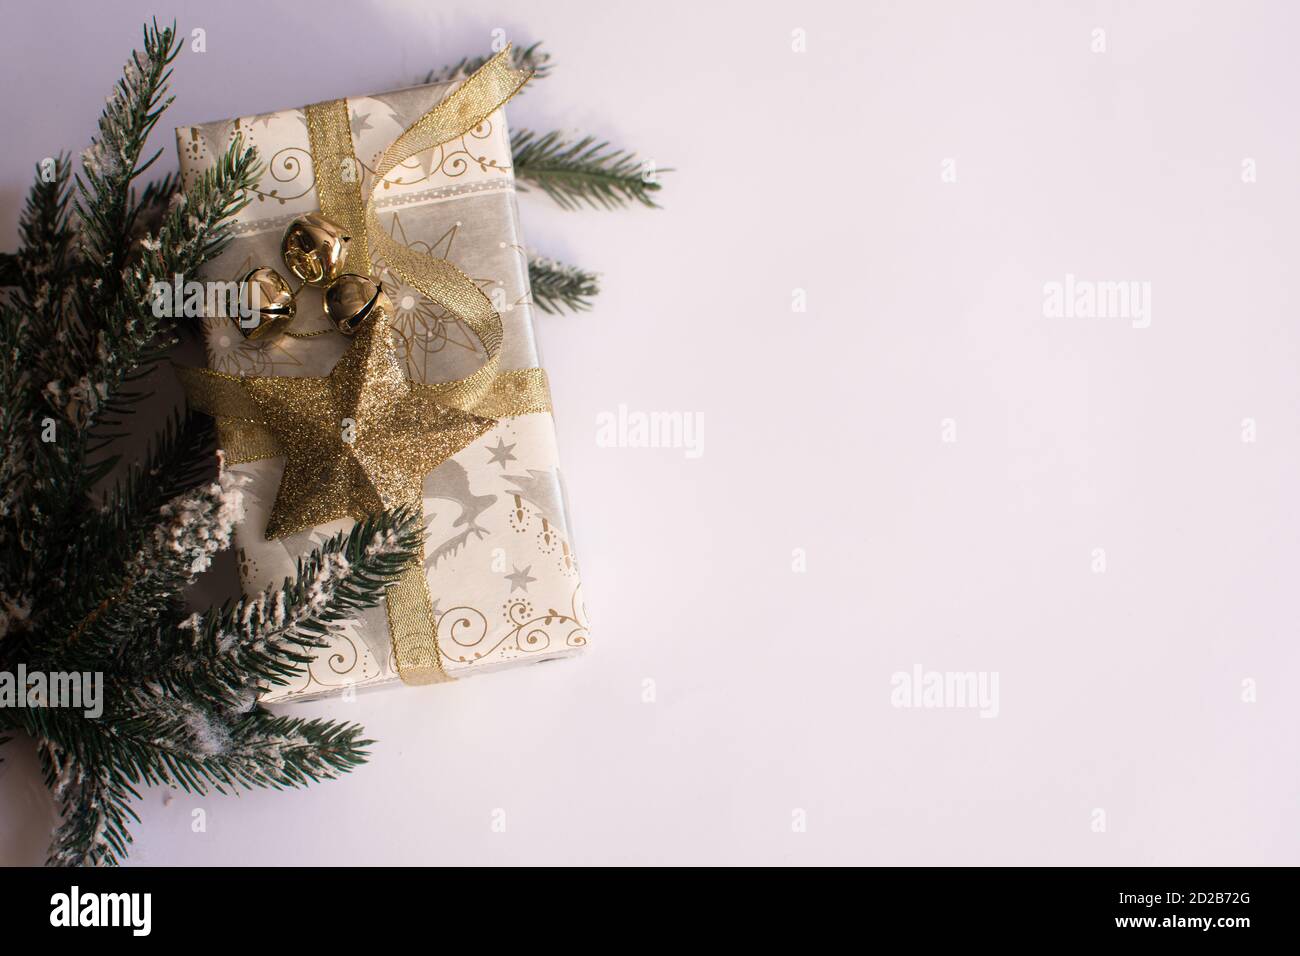 New Year's composition. Christmas gift, pine, on a white background. Stock Photo